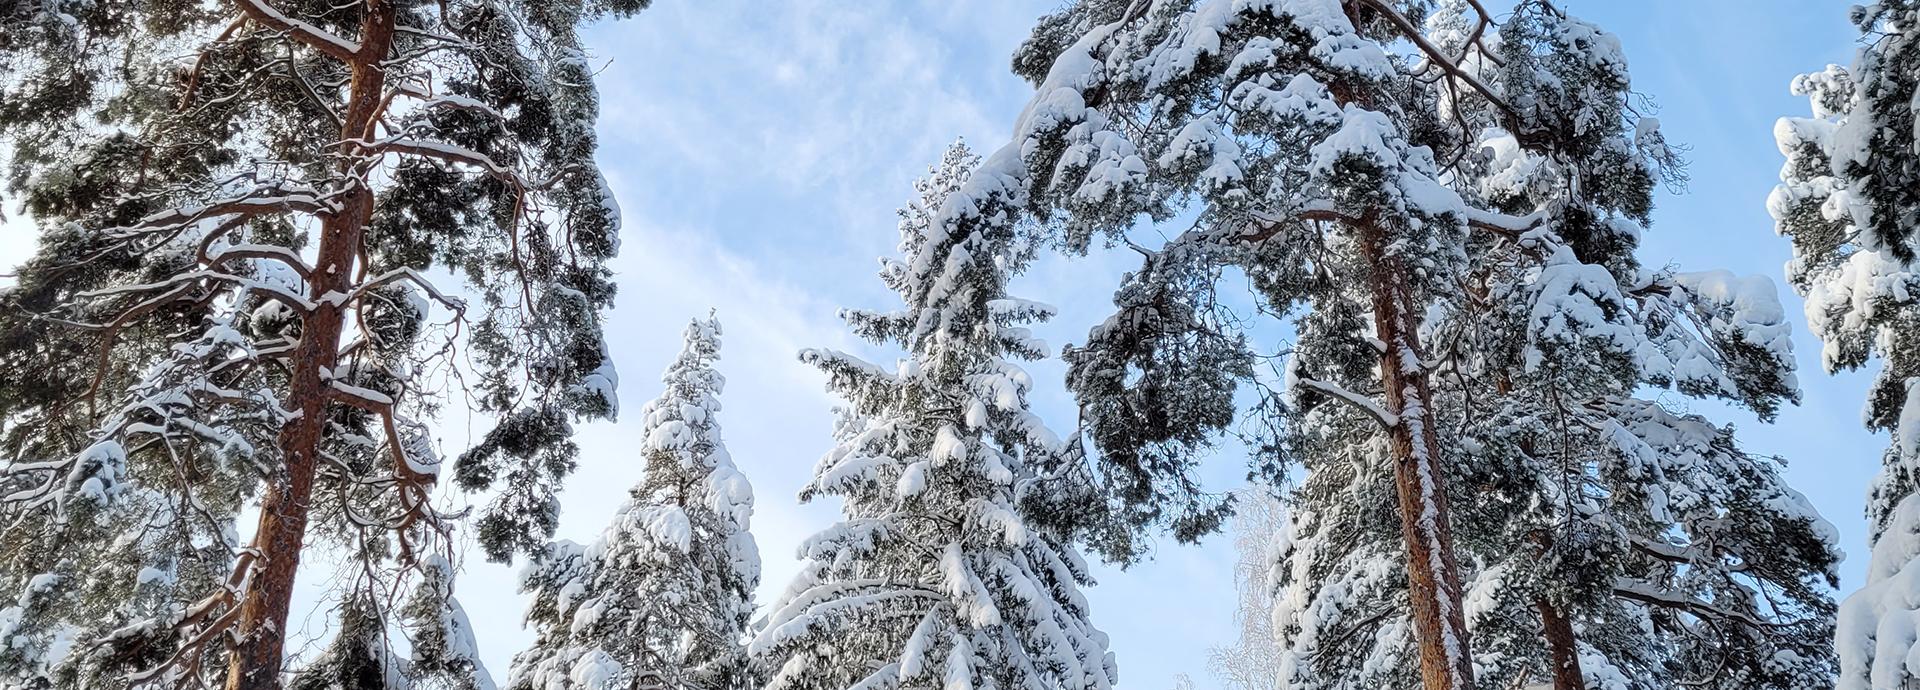 There are snowy pine trees, photographed from the ground up. The sky behind the trees is blue and sunny.